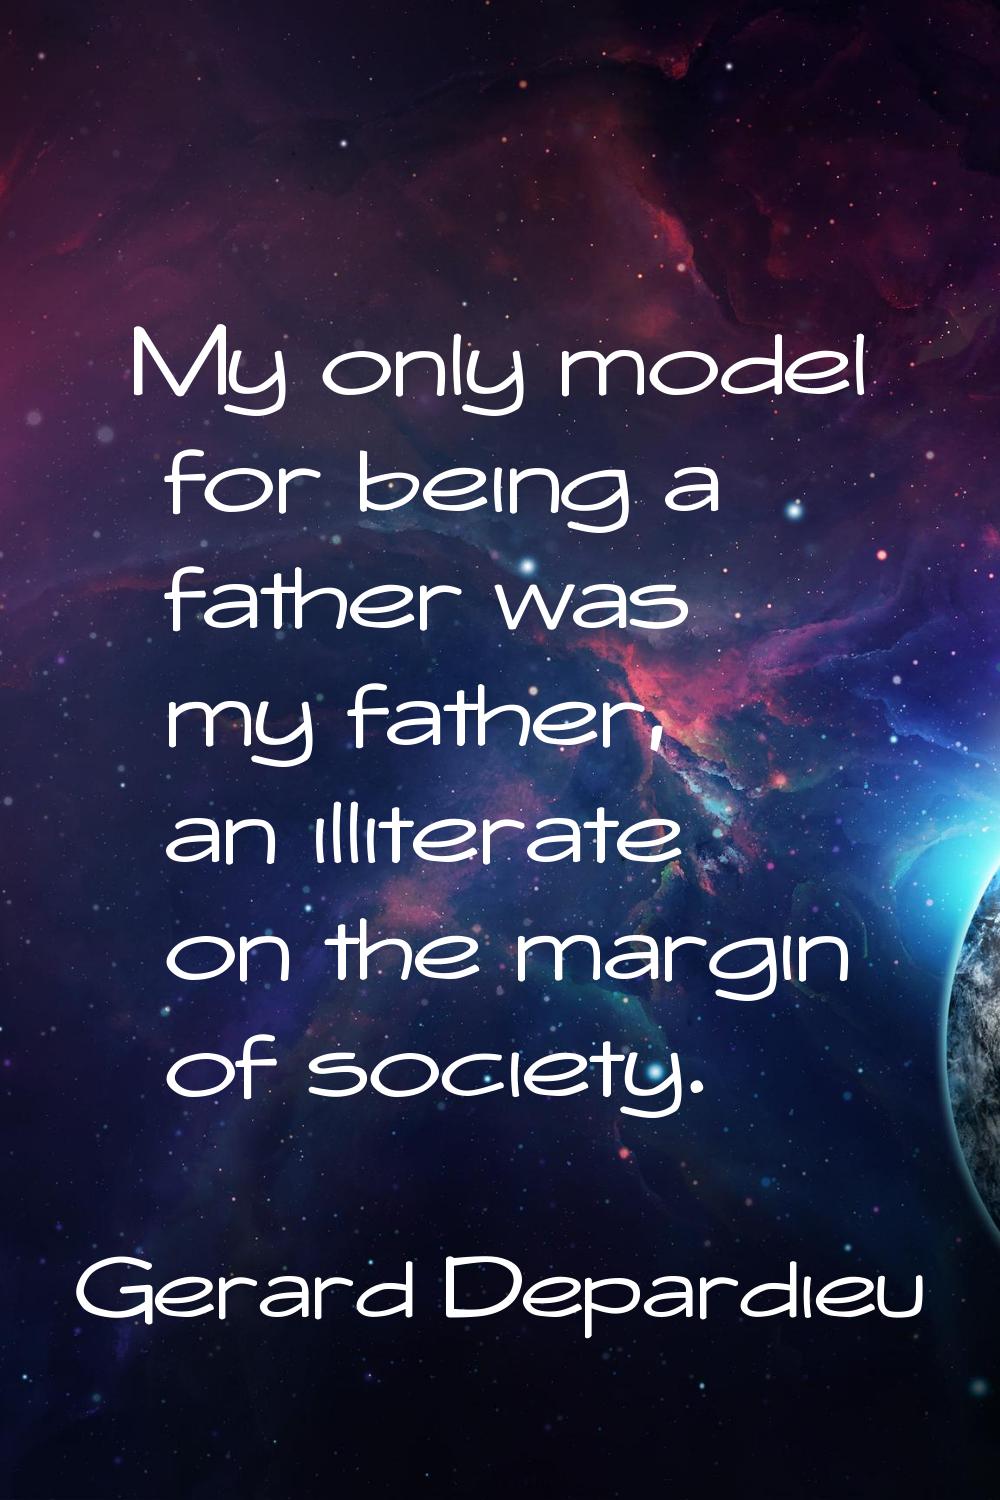 My only model for being a father was my father, an illiterate on the margin of society.